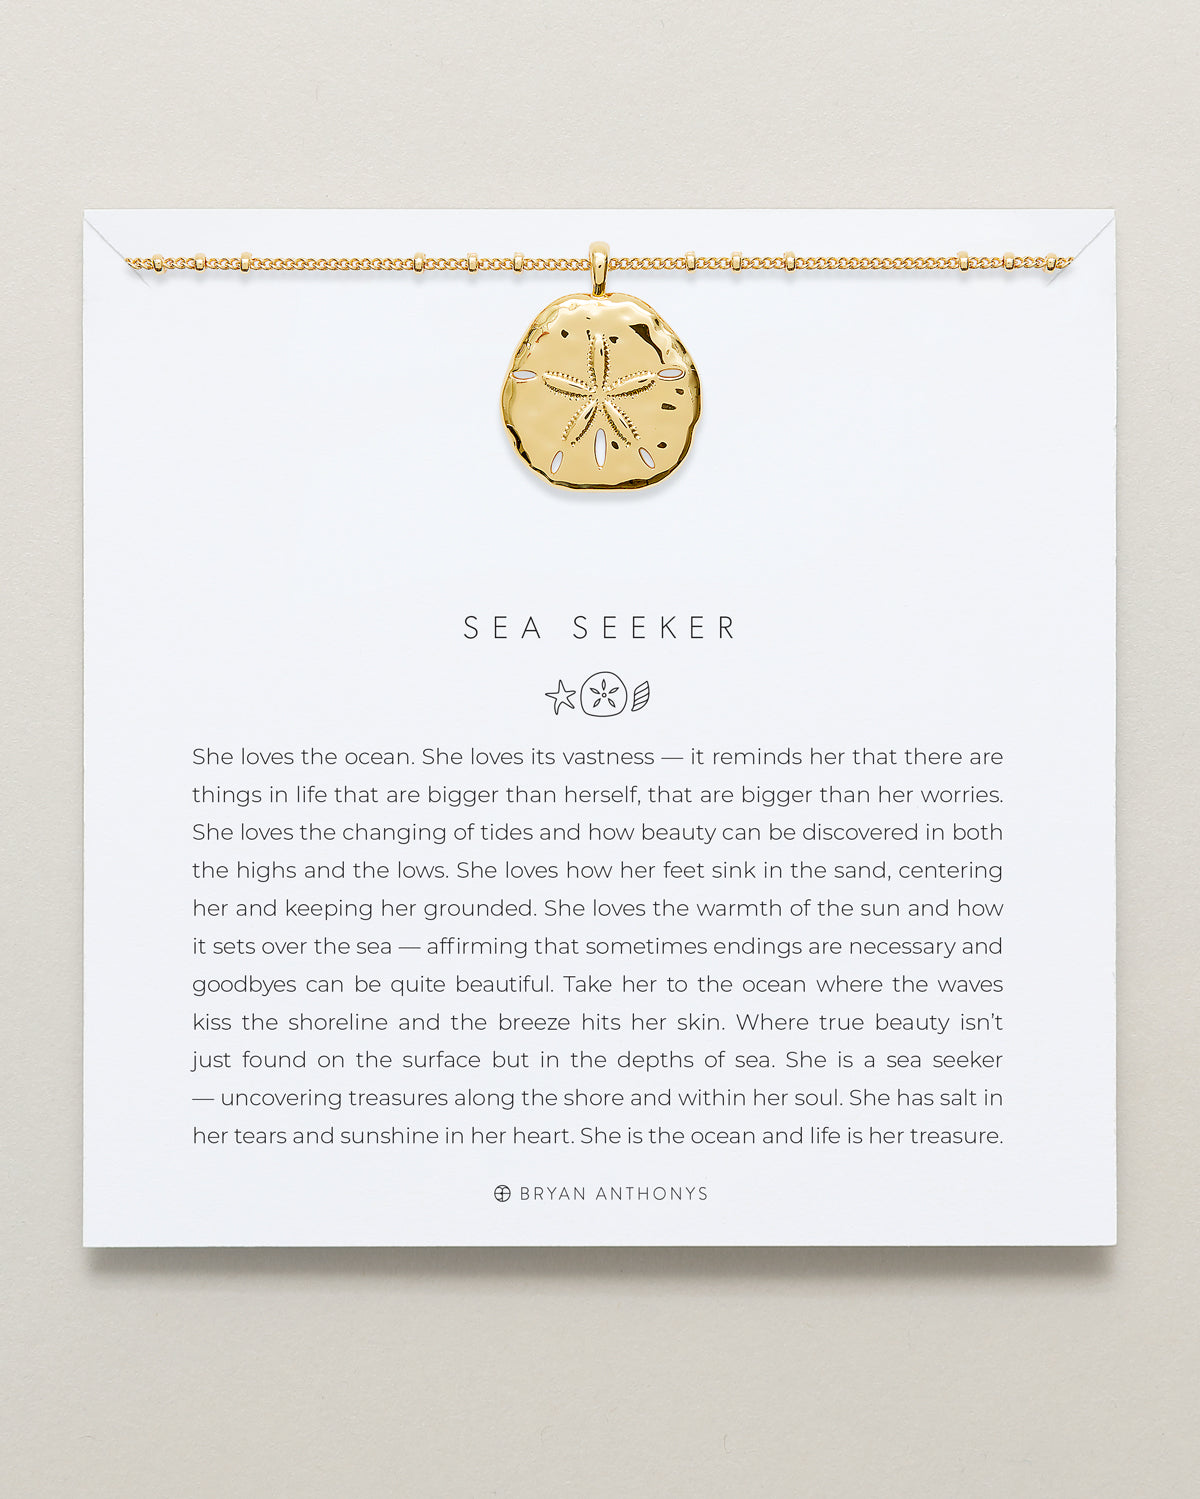 Bryan Anthonys Sea Seeker Gold Pendant Necklace On Card